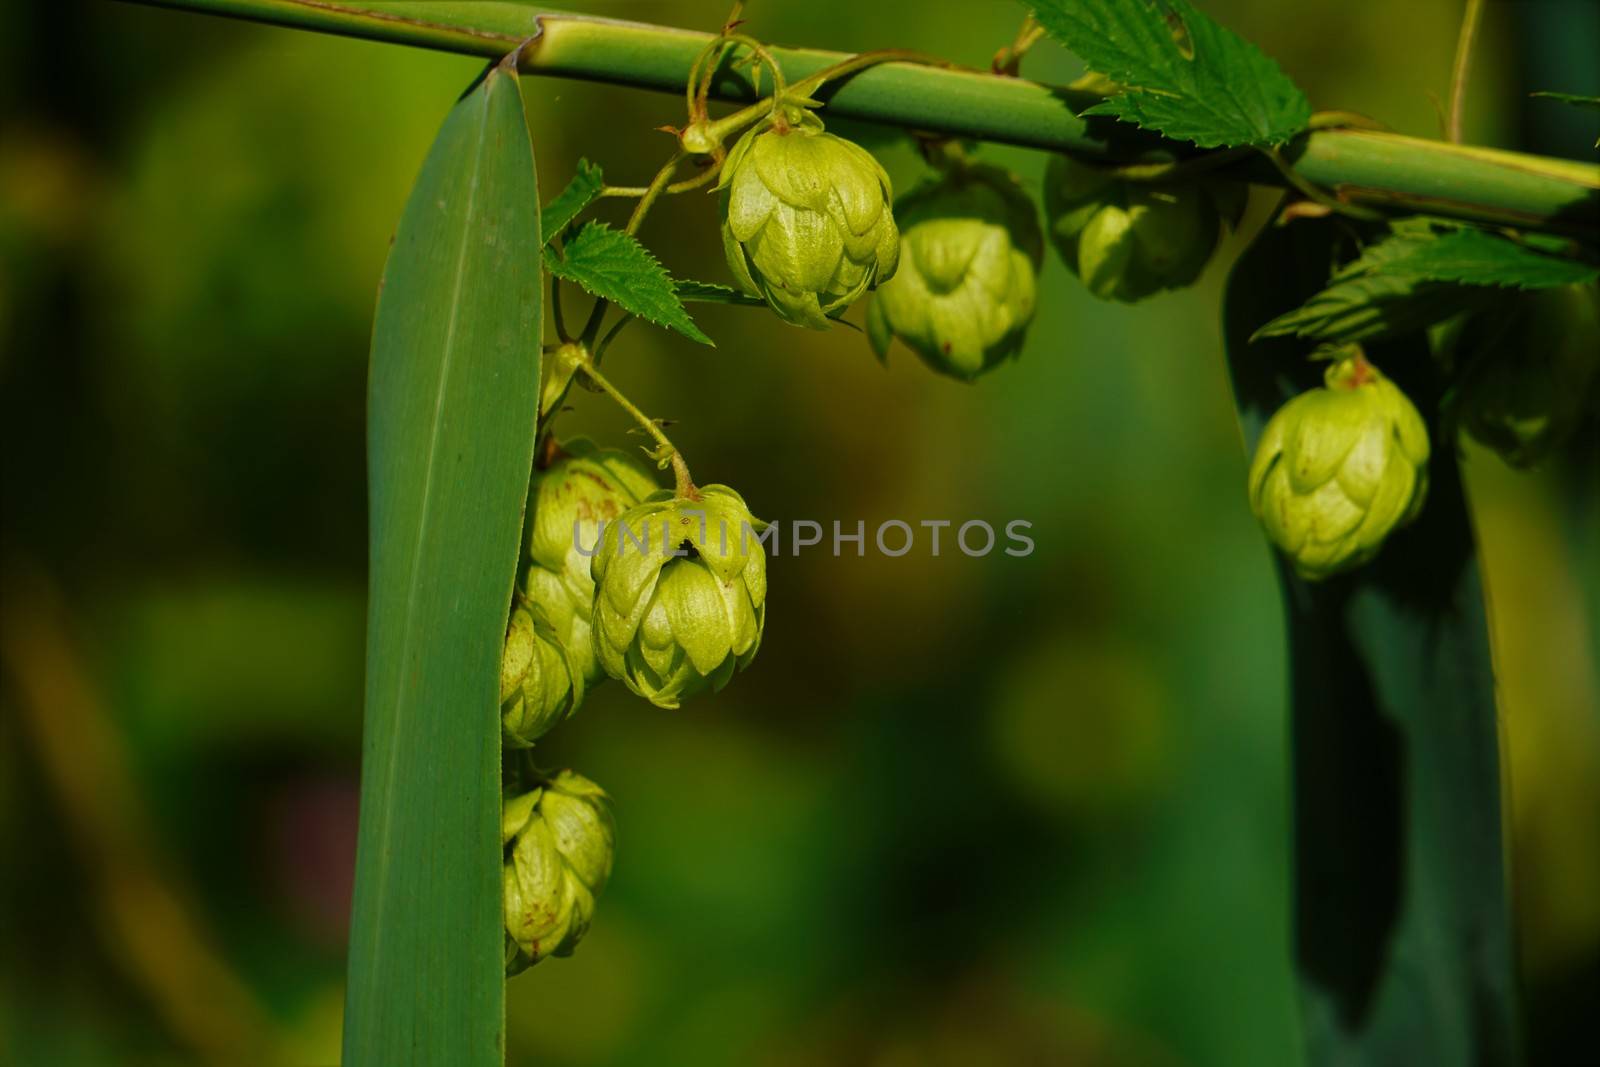 Female hop blossoms in the sun by pisces2386